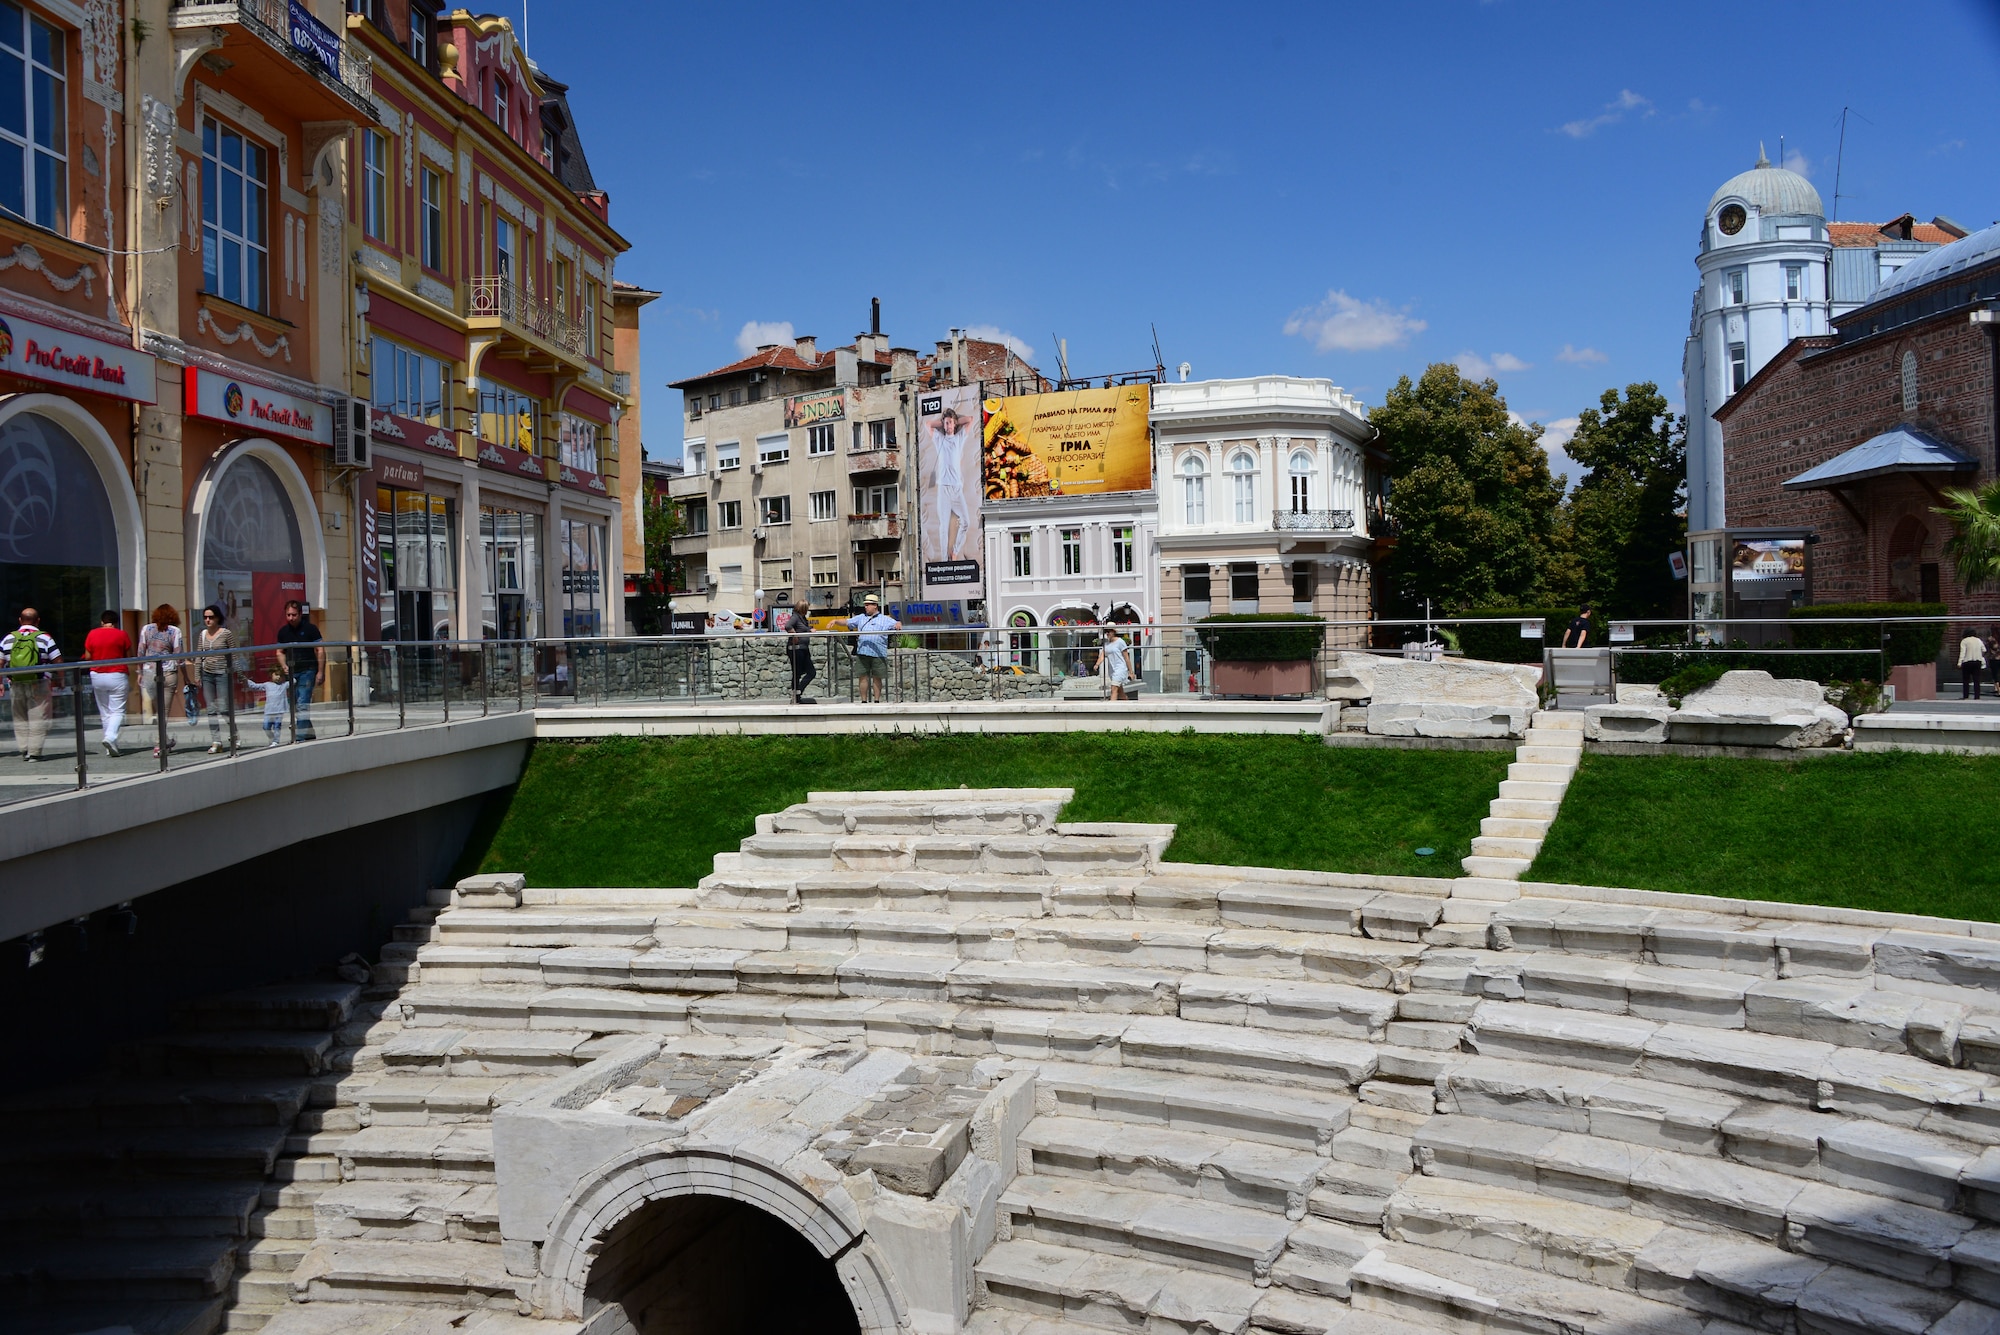 Ancient underground ruins mix with modern streets in Plovdiv, Bulgaria.  Tennessee National Guard Soldiers and Airmen enjoyed a Morale Wellness and Recreation visit to Plovdiv on Aug.13, 2016 while they were deployed to Novo Selo Training Area, Bulgaria to participate in Humanitarian Civic Assistance projects.    (U.S. Air National Guard photo by Master Sgt. Kendra M. Owenby, 134 ARW Public Affairs)